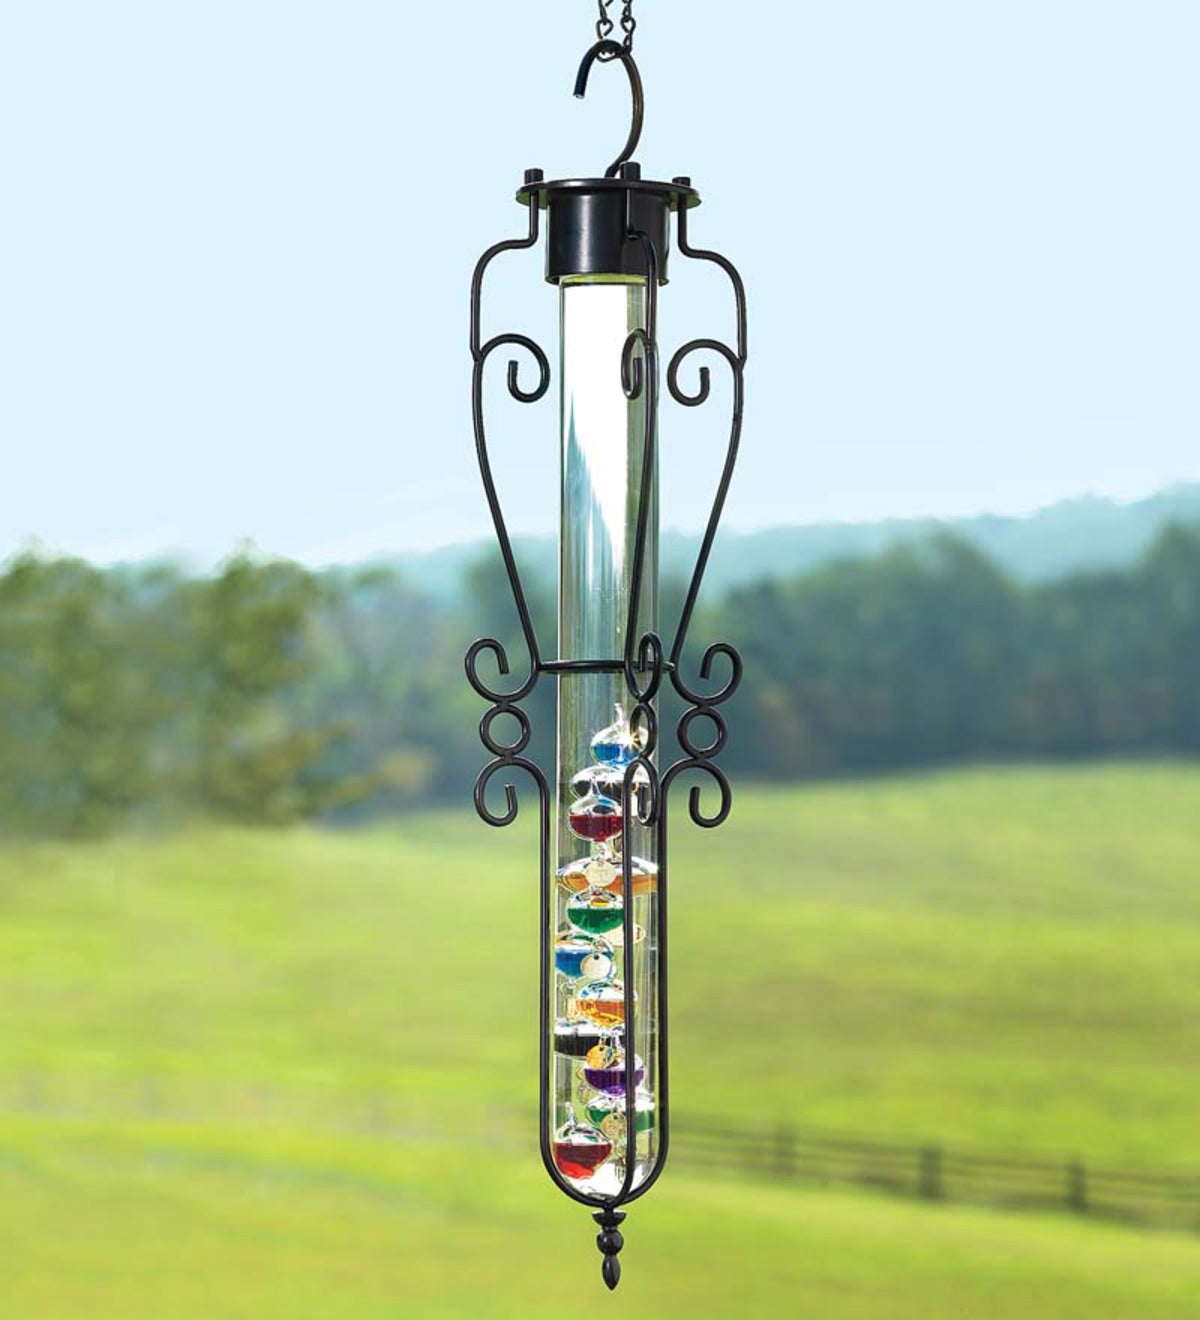 How does a Galileo thermometer work?